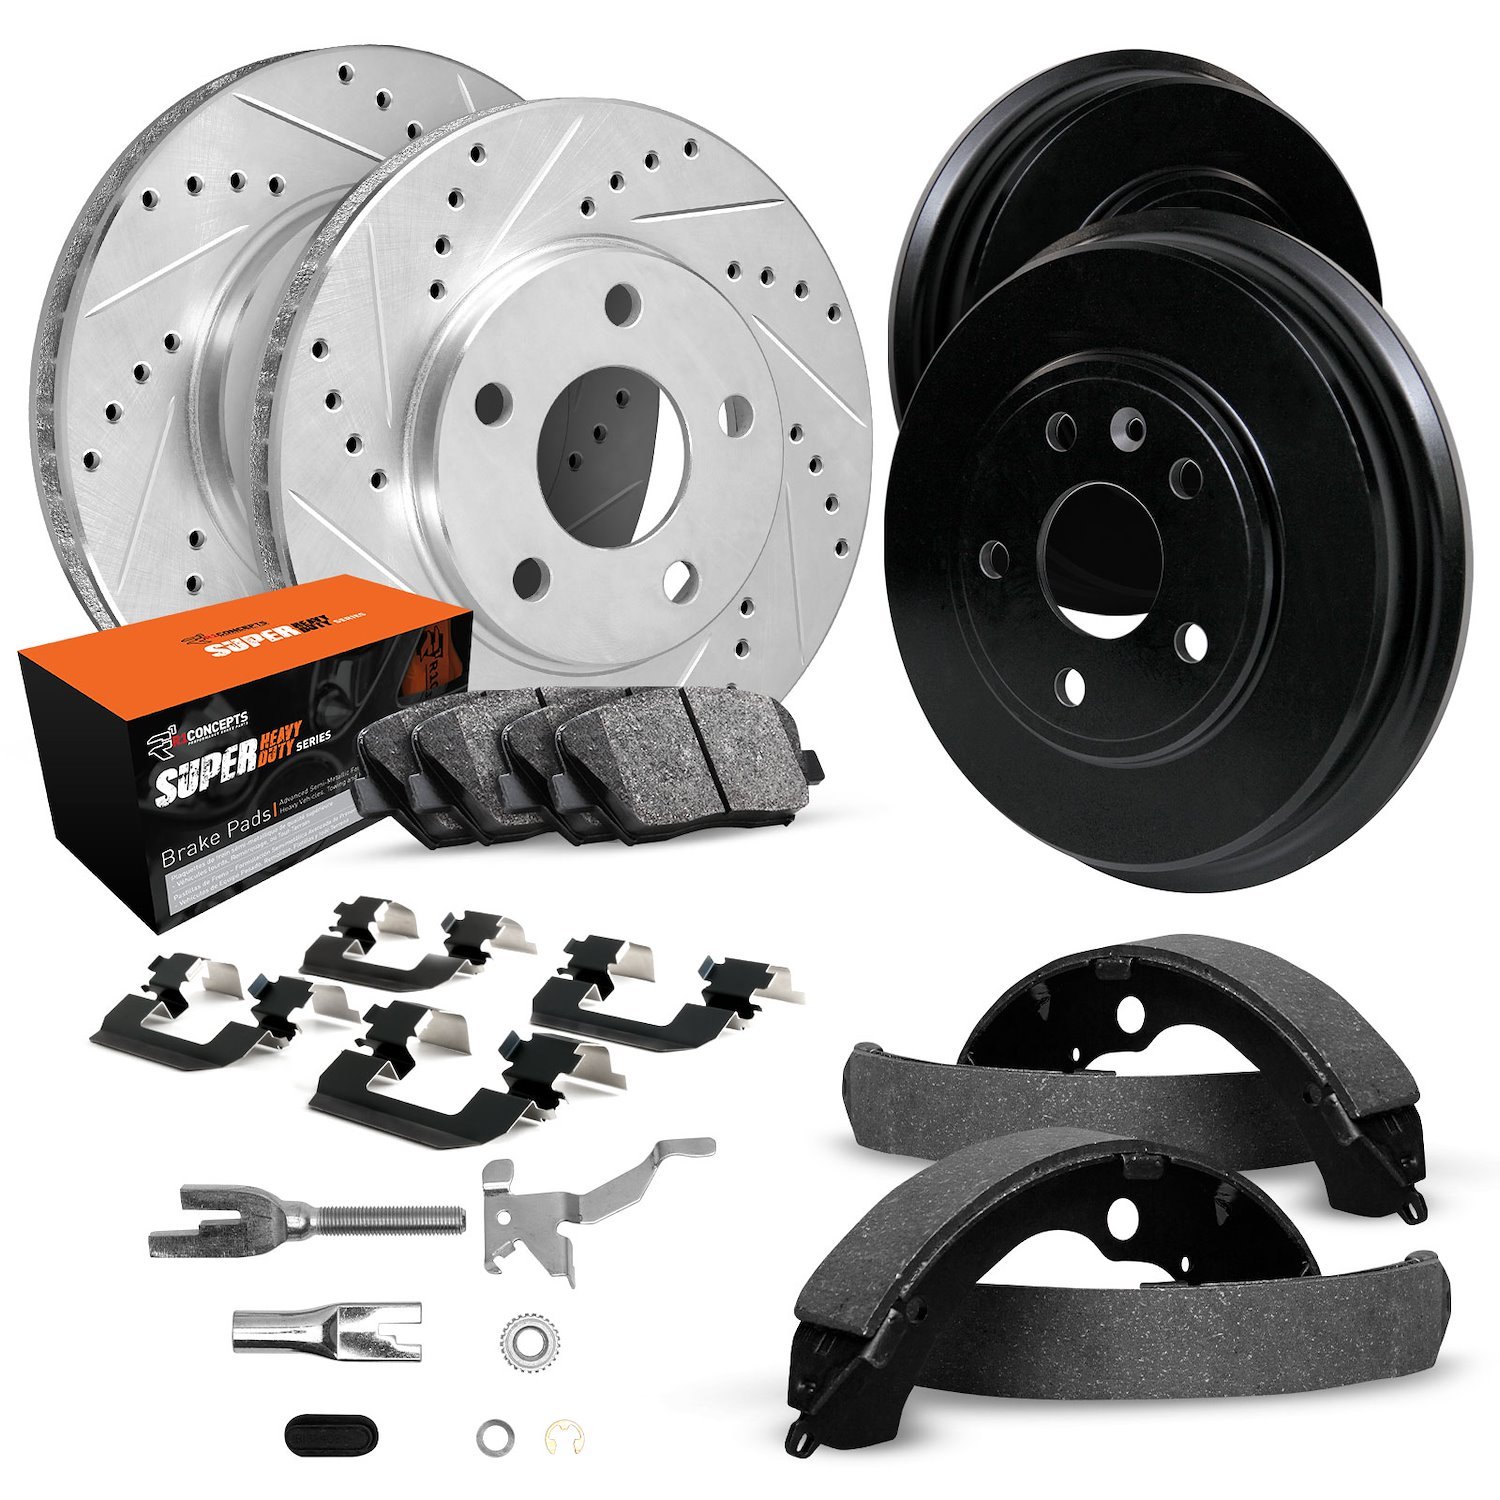 E-Line Drilled/Slotted Silver Rotor & Drum Set w/Super-Duty Pads, Shoes/Hardware/Adjusters, 1982-1986 Mopar